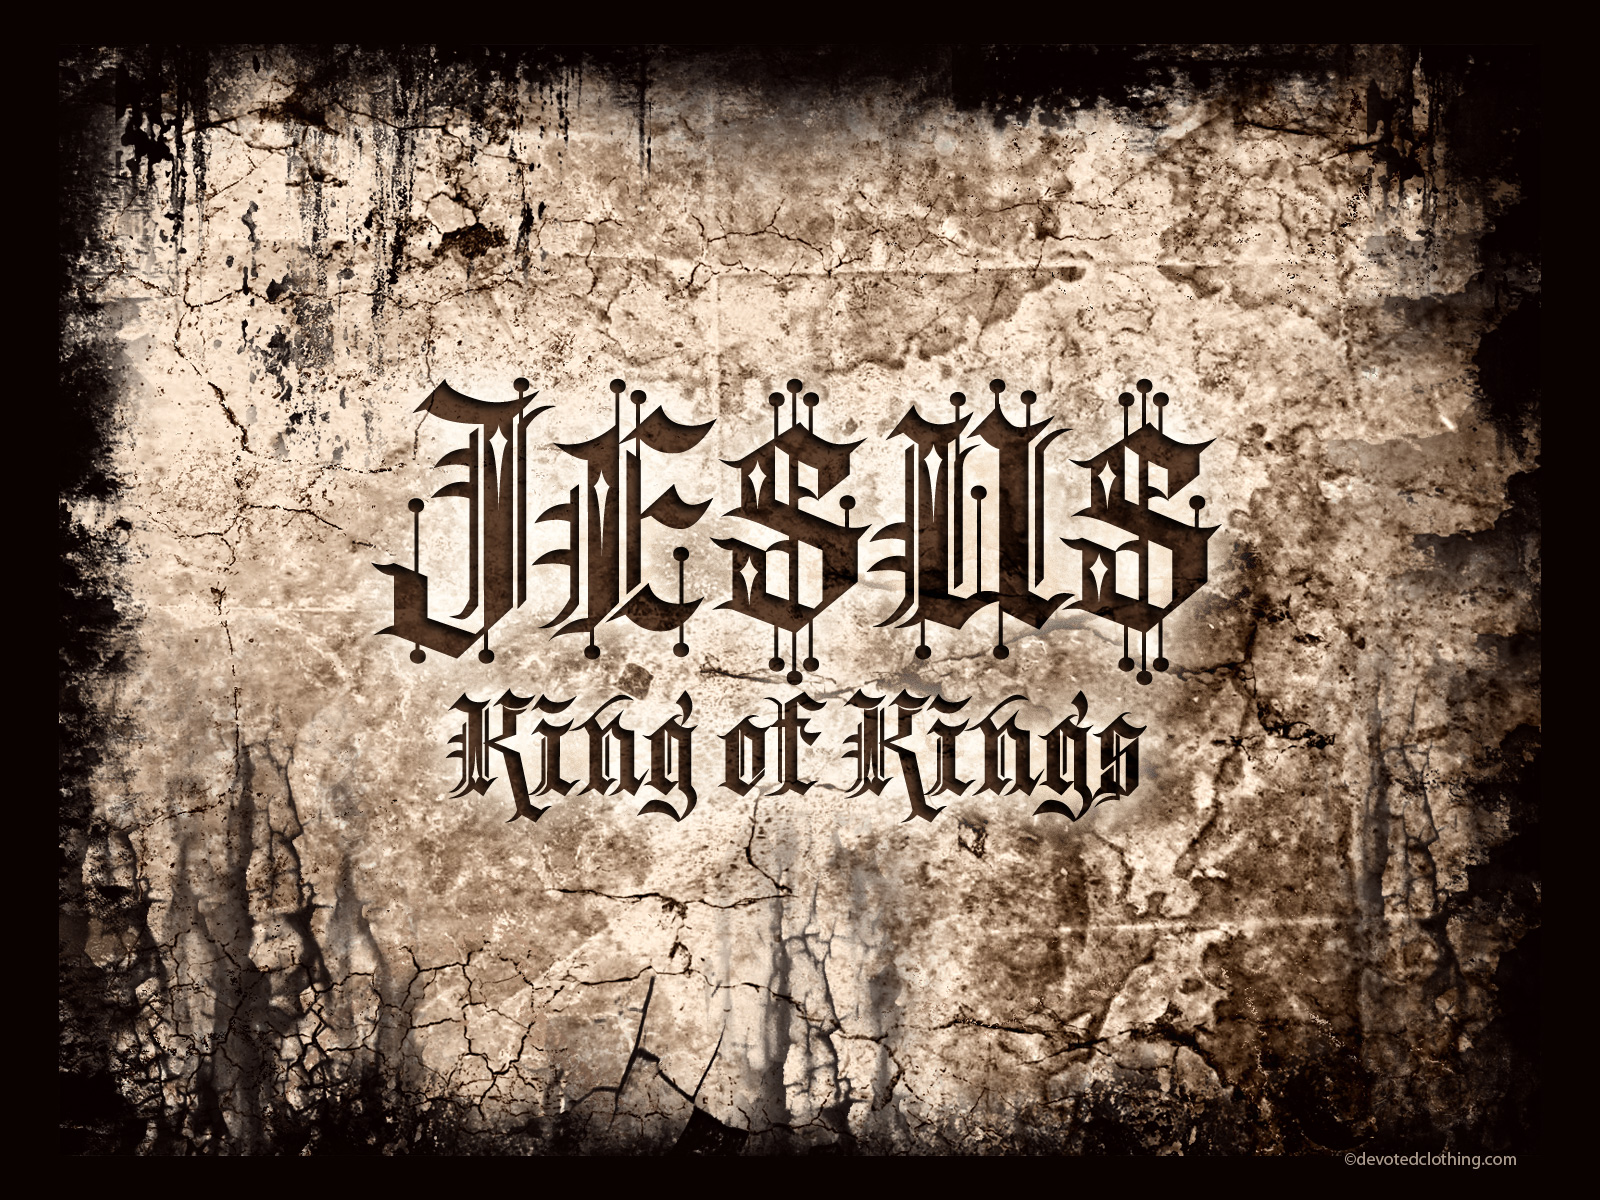 King of Kings by Devoted C